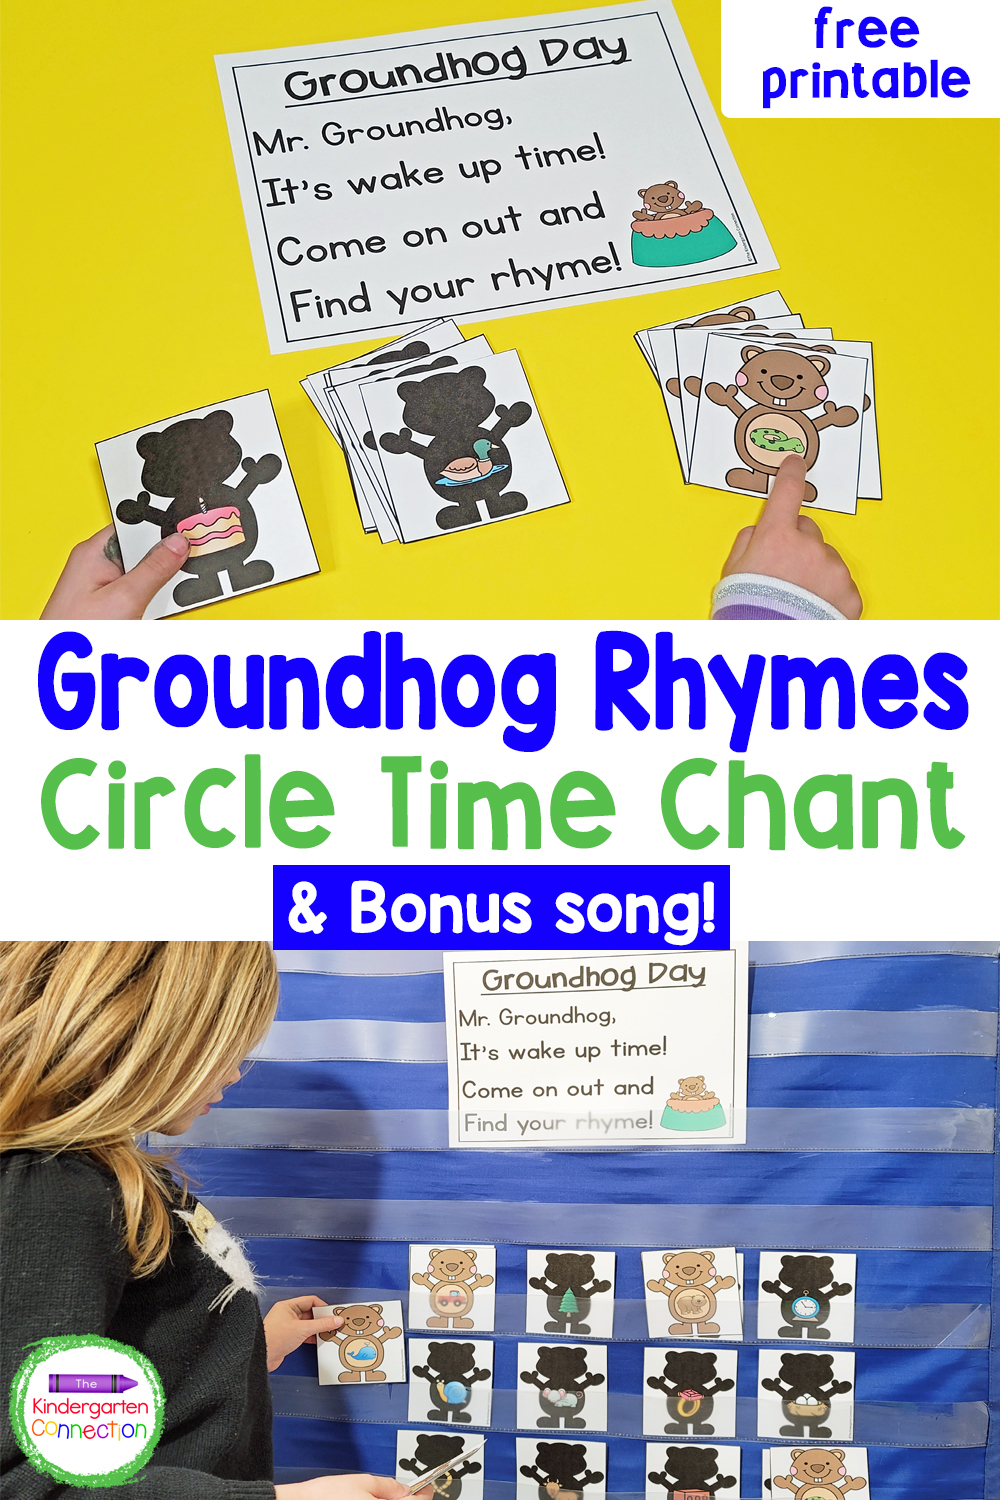 This free Groundhog Day Chant and Rhyming Match is the perfect way to celebrate Groundhog Day while working on rhyming skills!